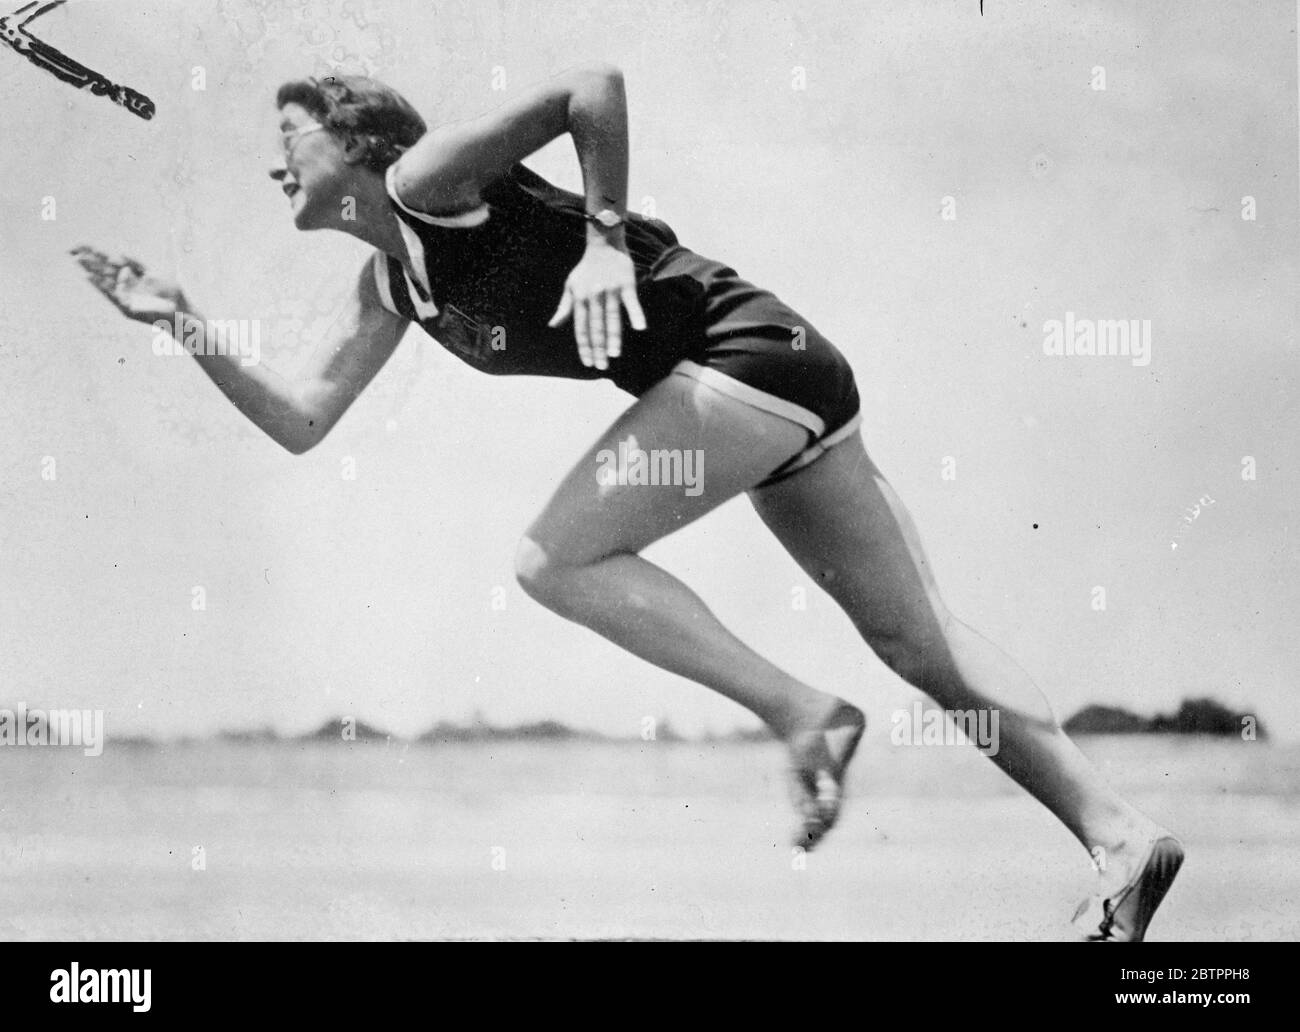 Quick off the mark. British Empire games girl practices in Melbourne. Miss M Holloway, a member of the British women's team in Australia for the Empire games to take place in Sydney, practices the 100 yard sprint in Olympic Park, Melbourne.. 26 January 1938 Stock Photo